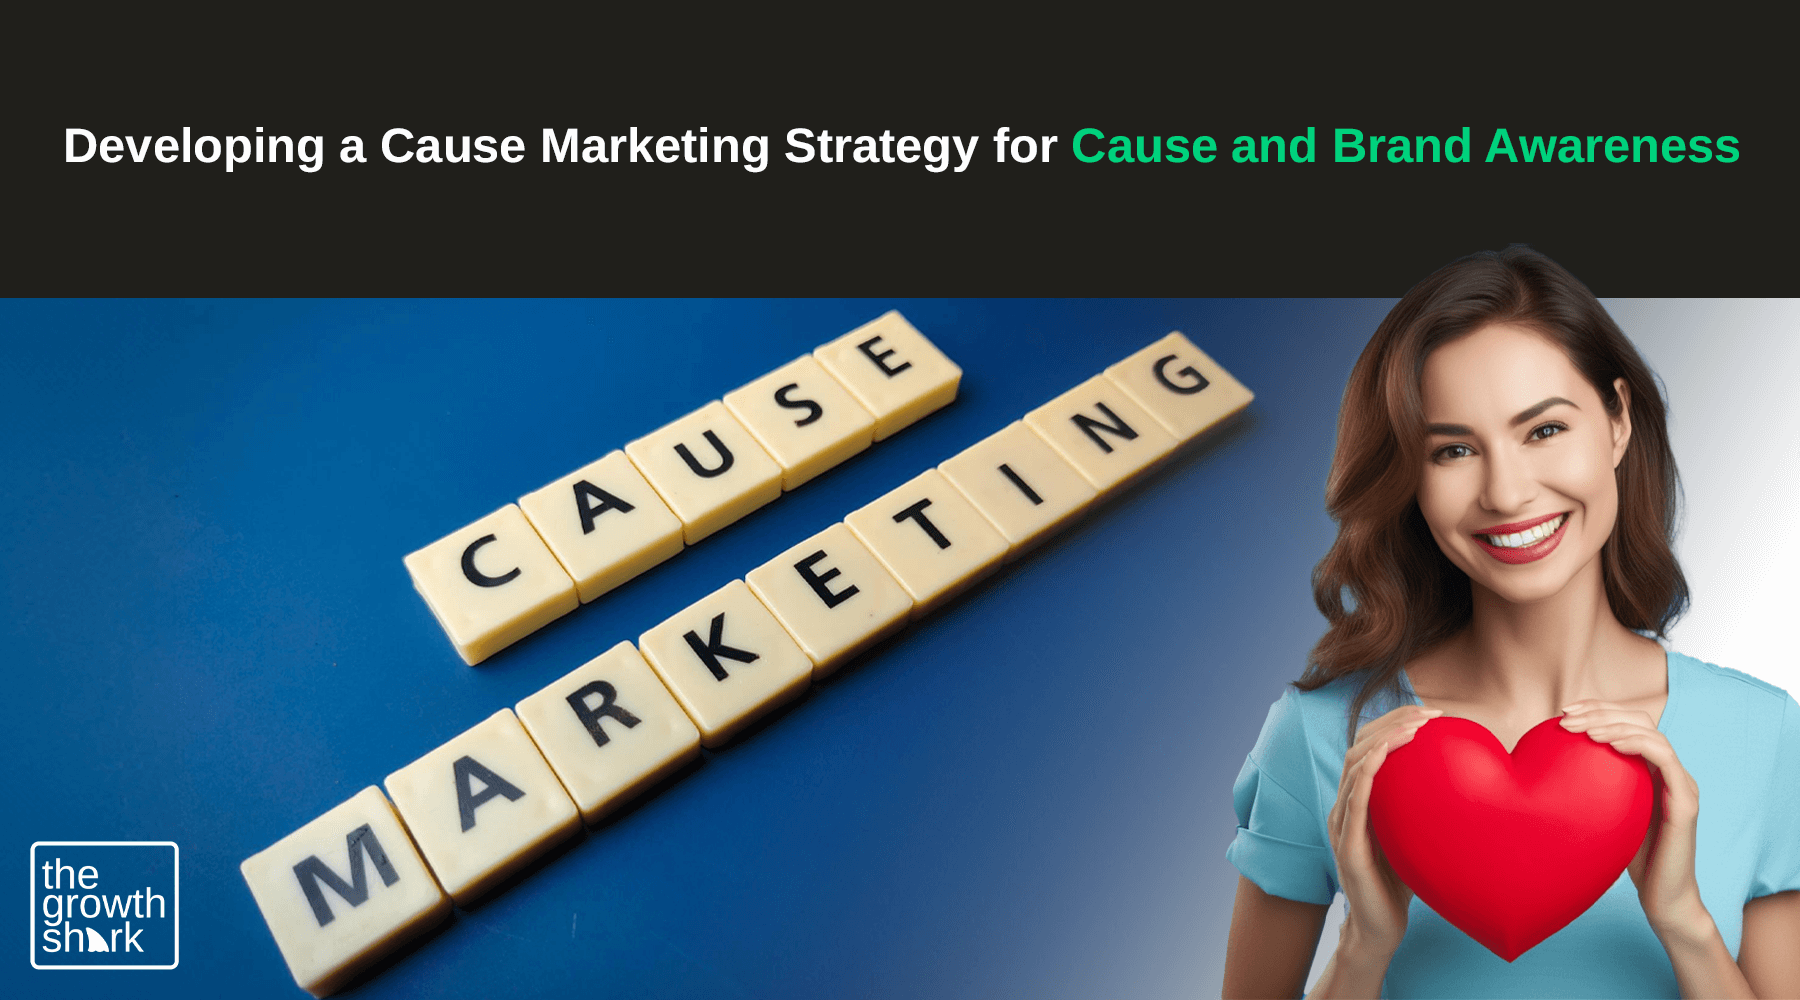 How to Develop a Cause Marketing Social Media Strategy that Drives Cause and Brand Awareness